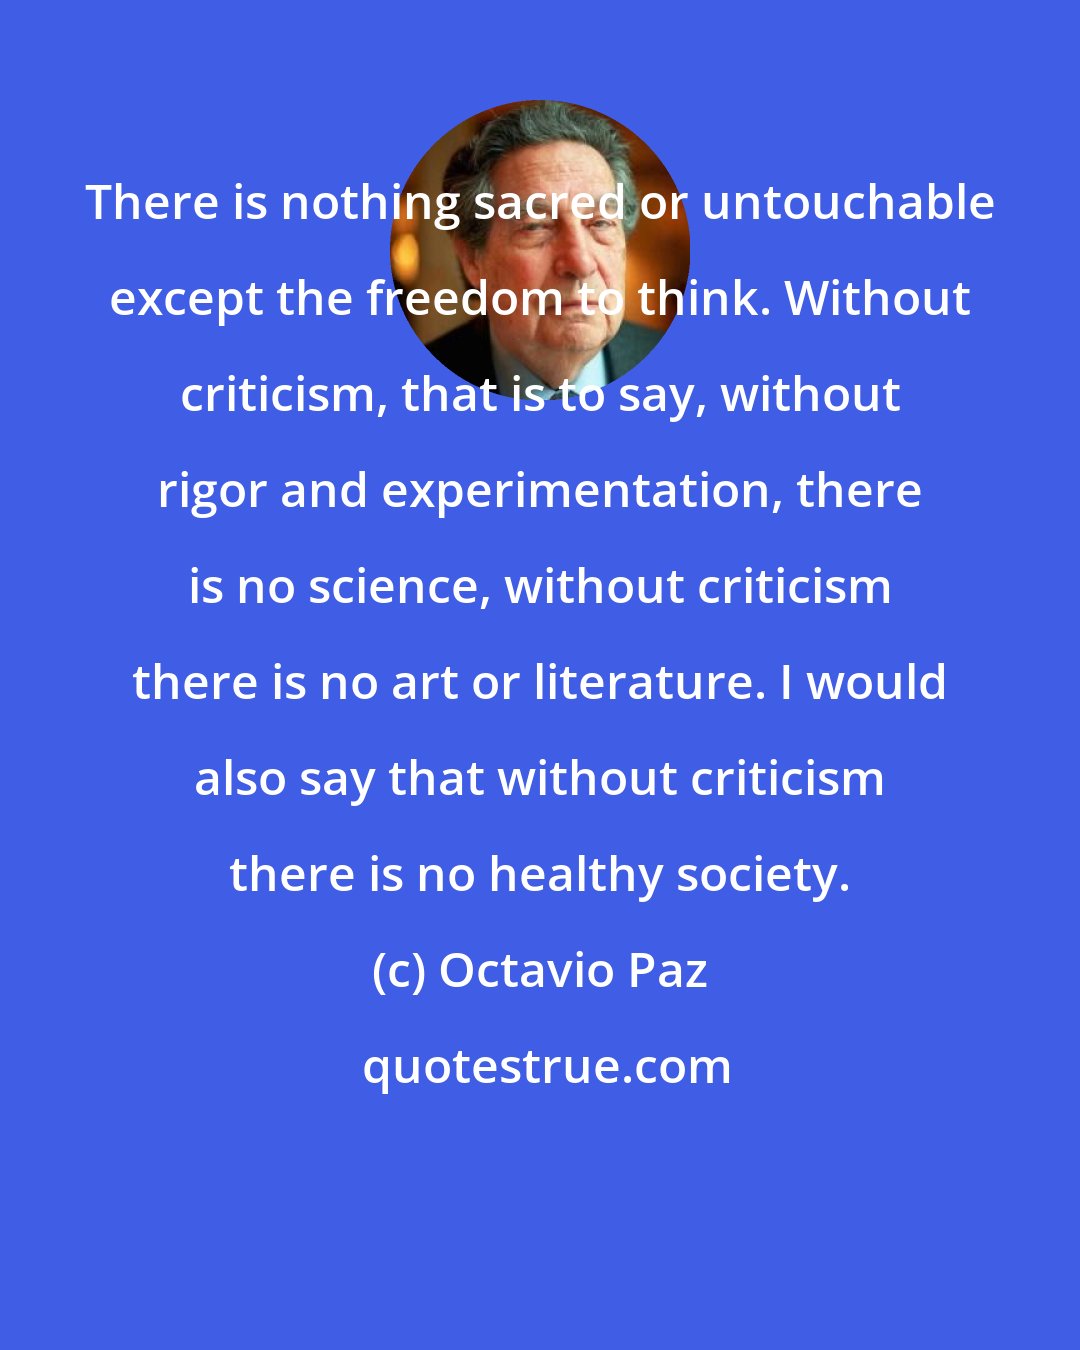 Octavio Paz: There is nothing sacred or untouchable except the freedom to think. Without criticism, that is to say, without rigor and experimentation, there is no science, without criticism there is no art or literature. I would also say that without criticism there is no healthy society.